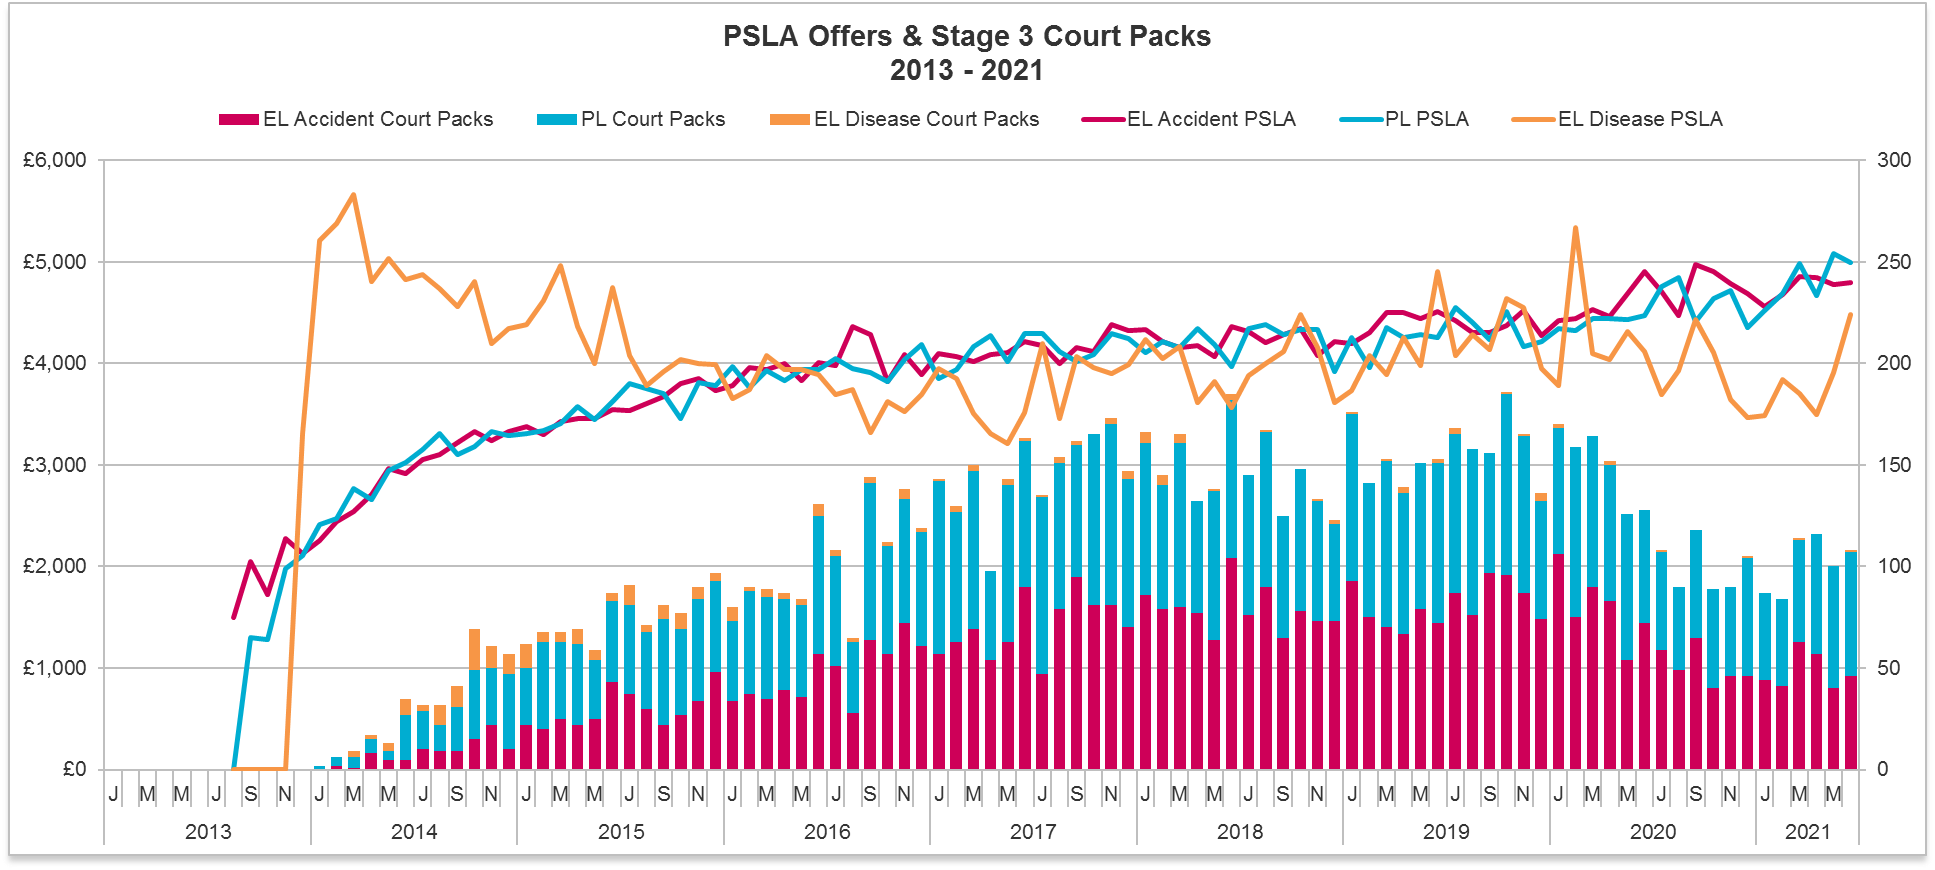 PSLA offers and court packs